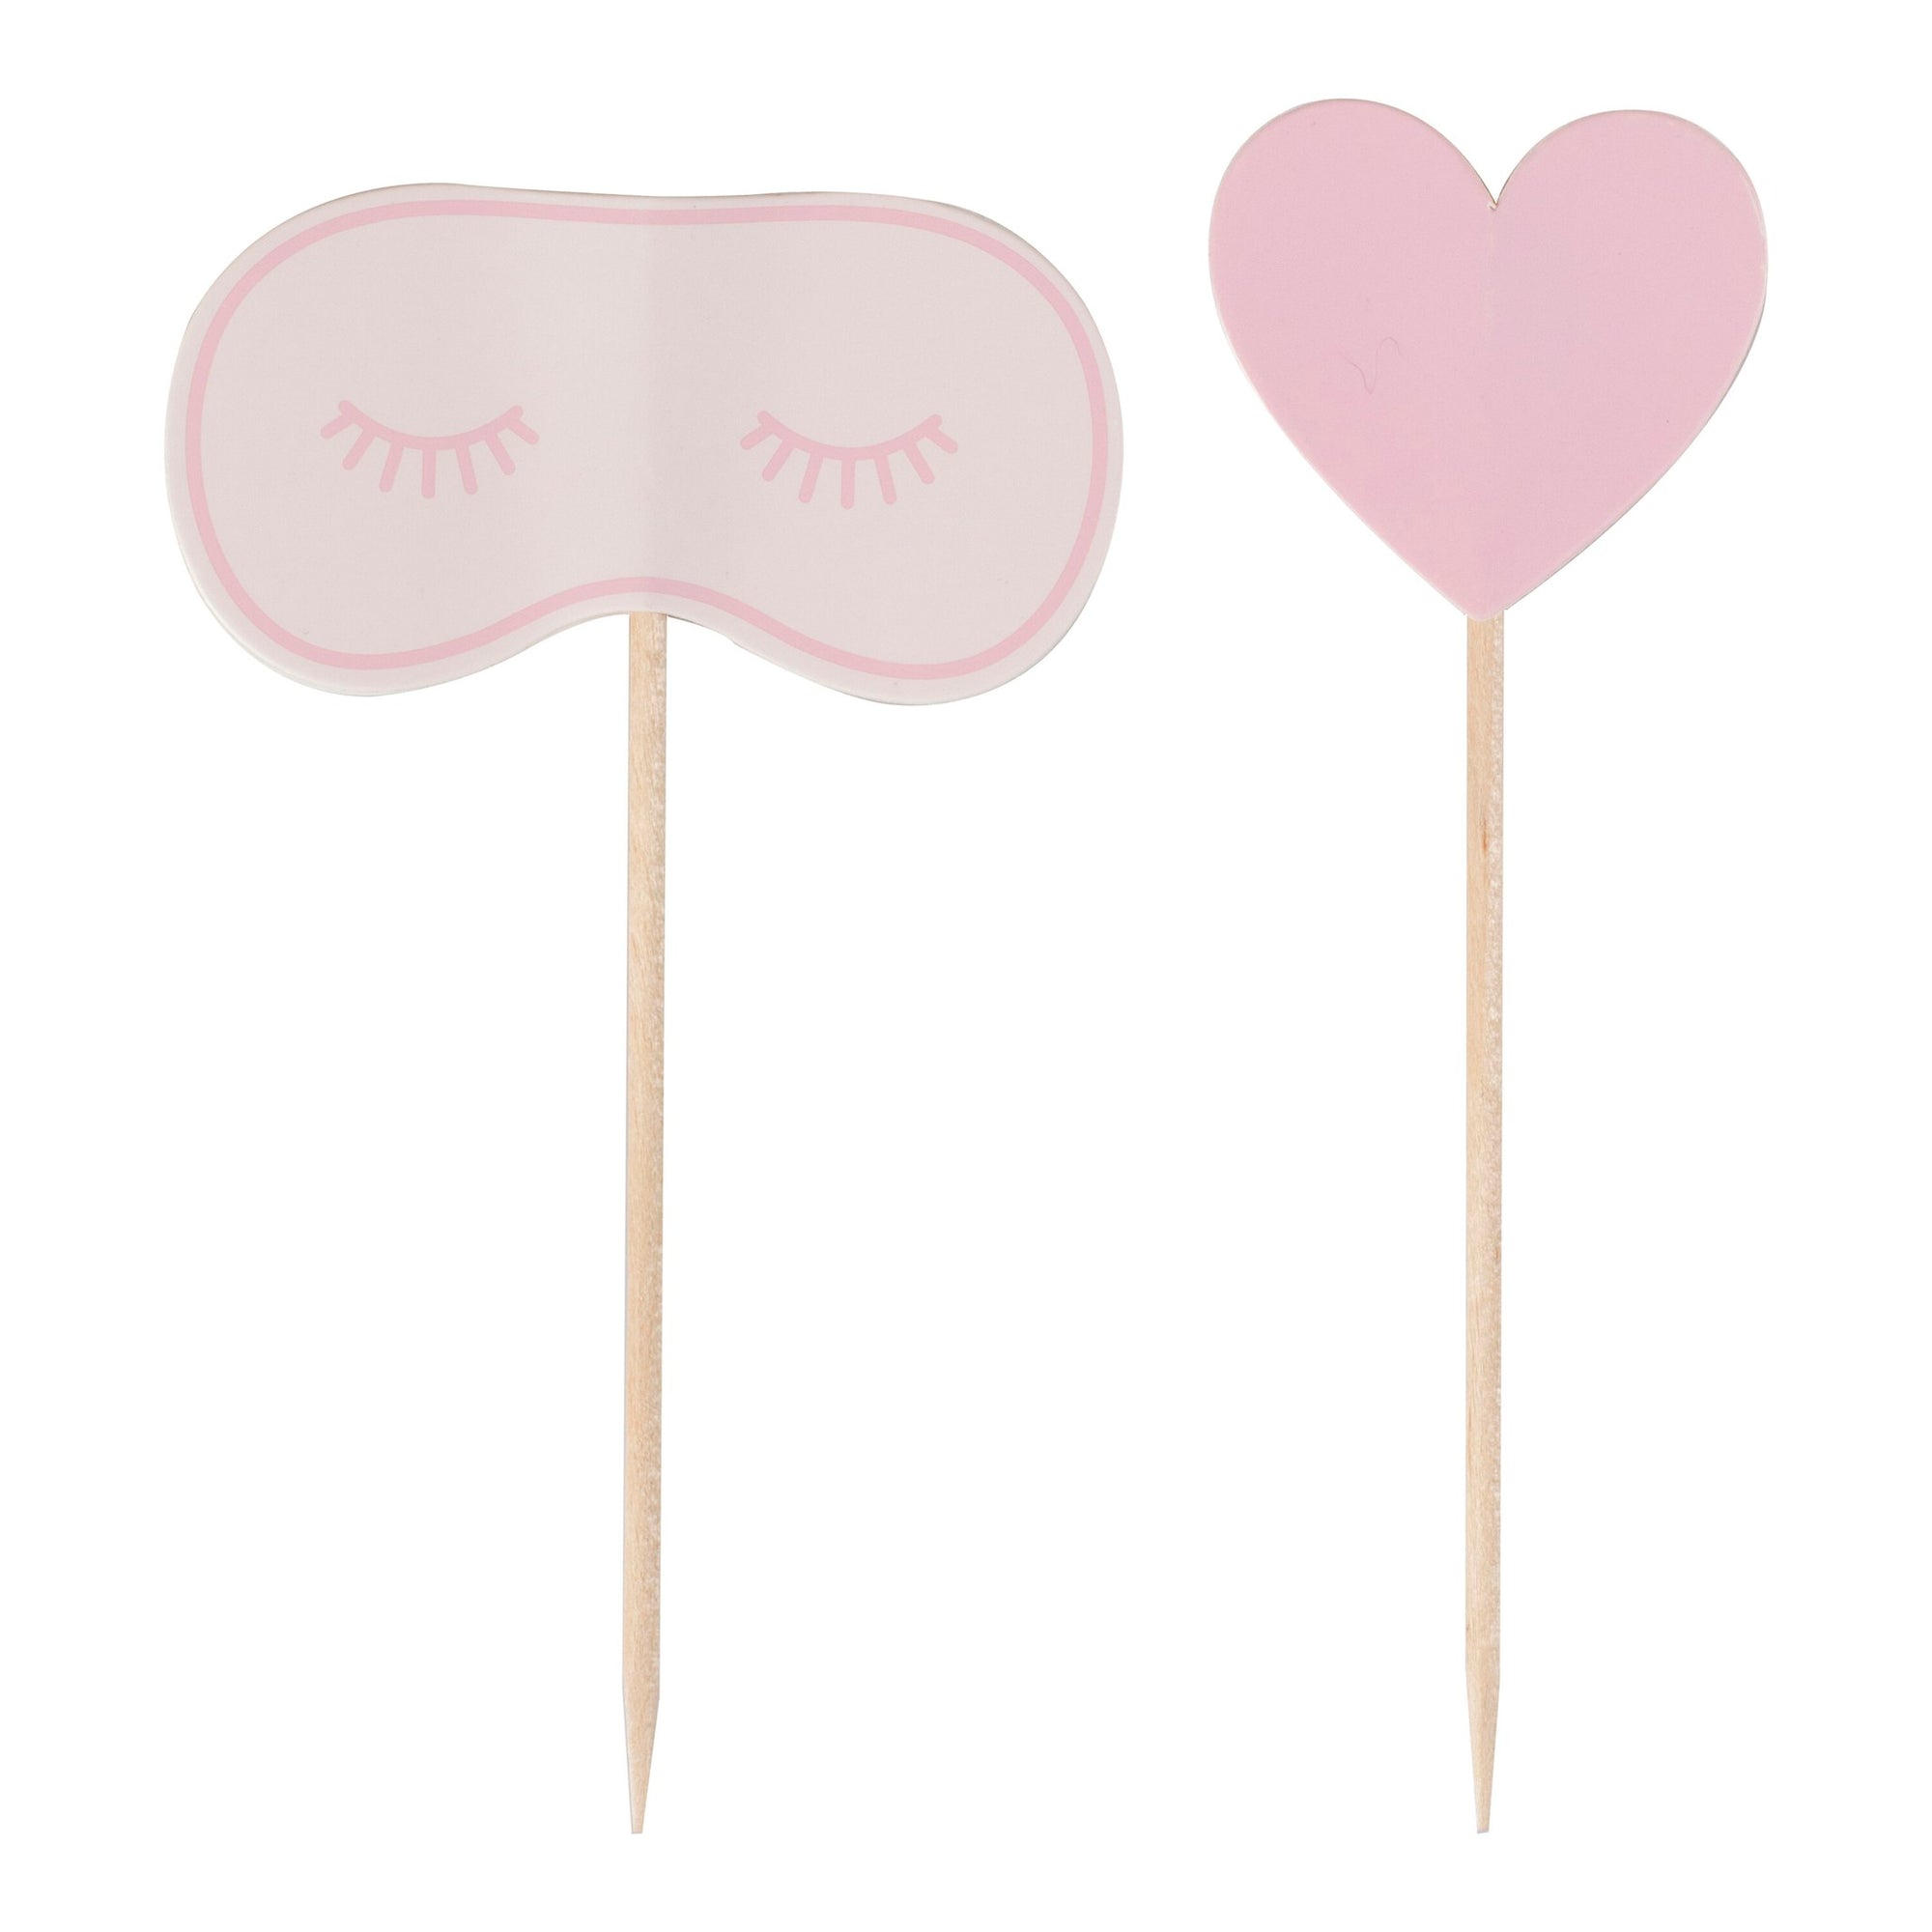 Pink Eye Mask & Heart Pamper Party Cupcake Toppers